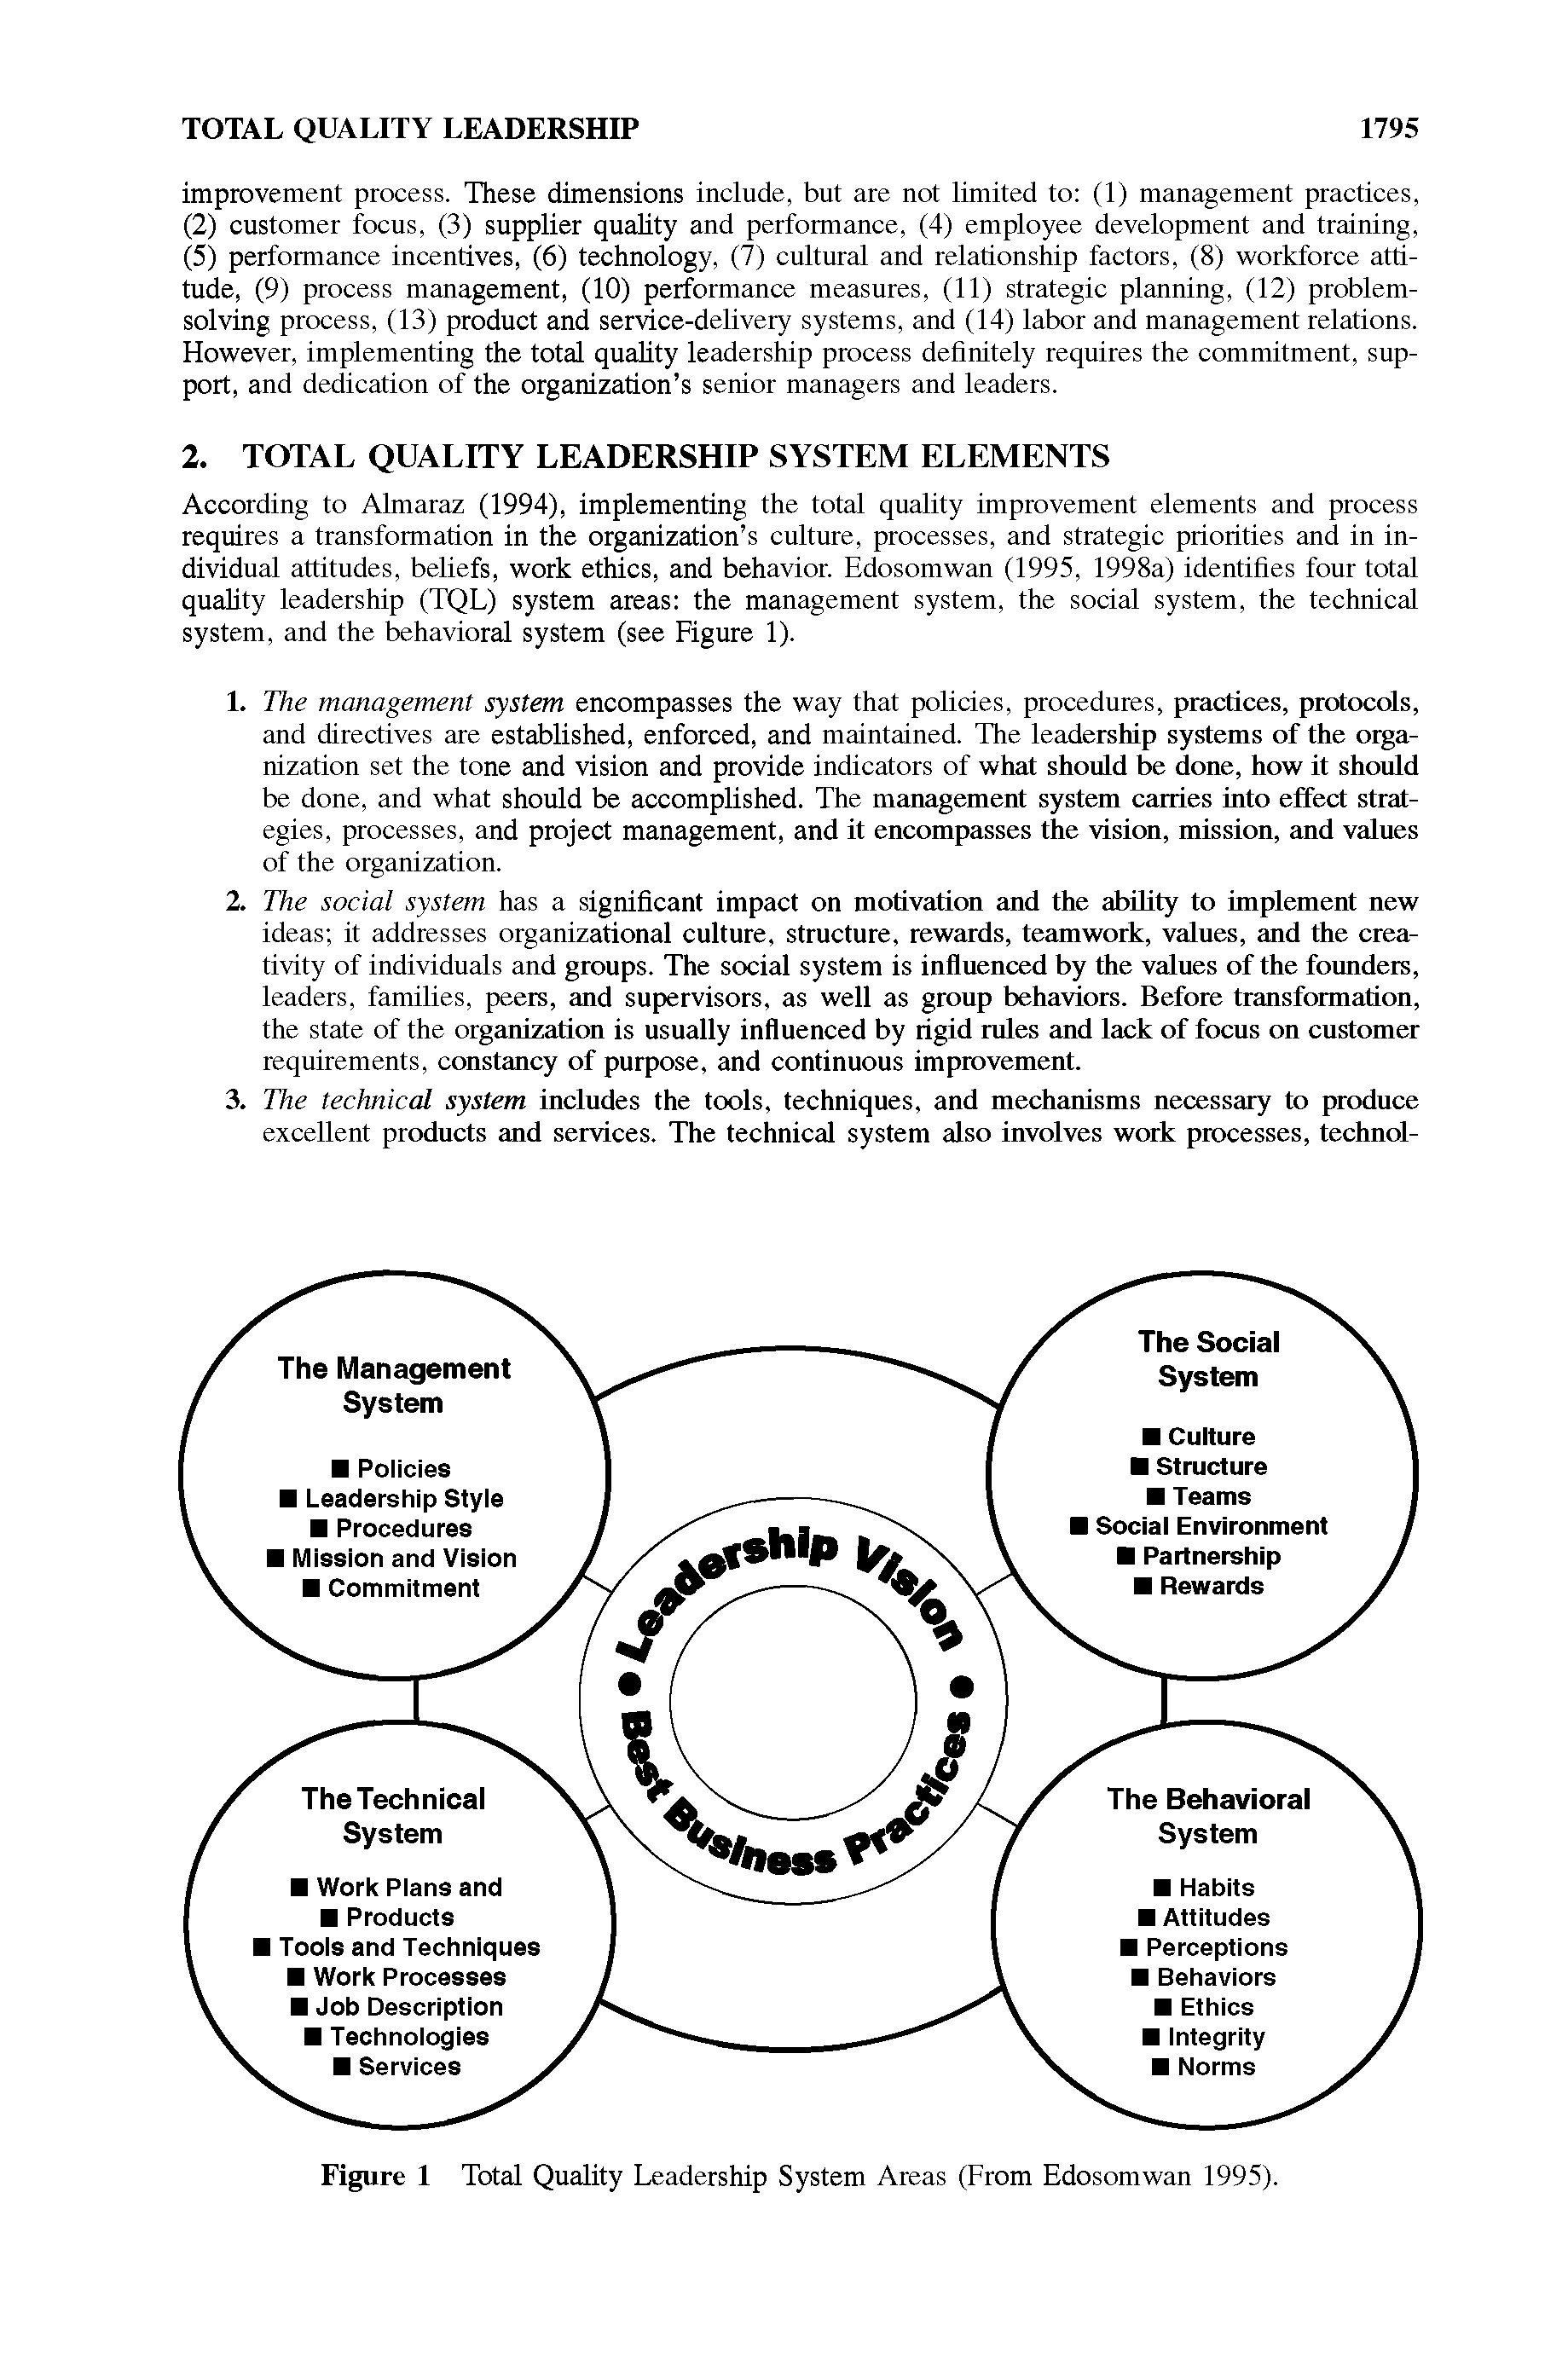 Figure I Total Quality Leadership System Areas (From Edosomwan 1995).